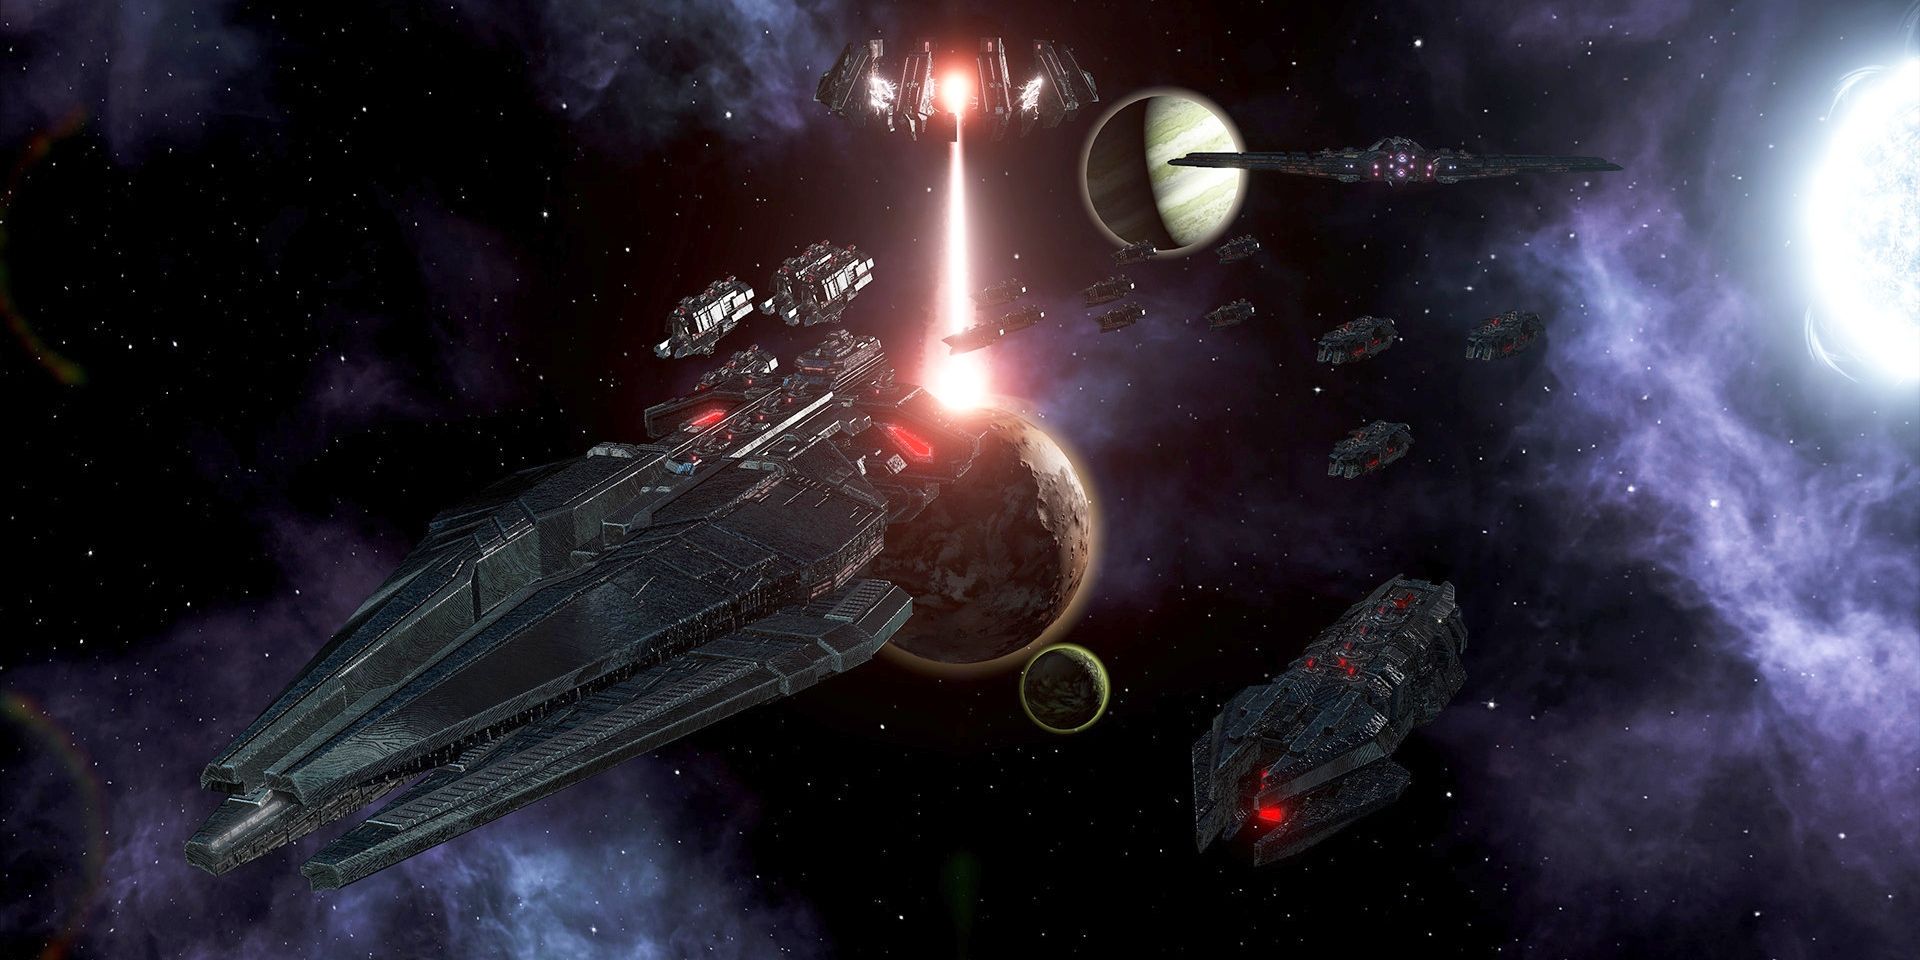 Ships travel through space in the video game Stellaris